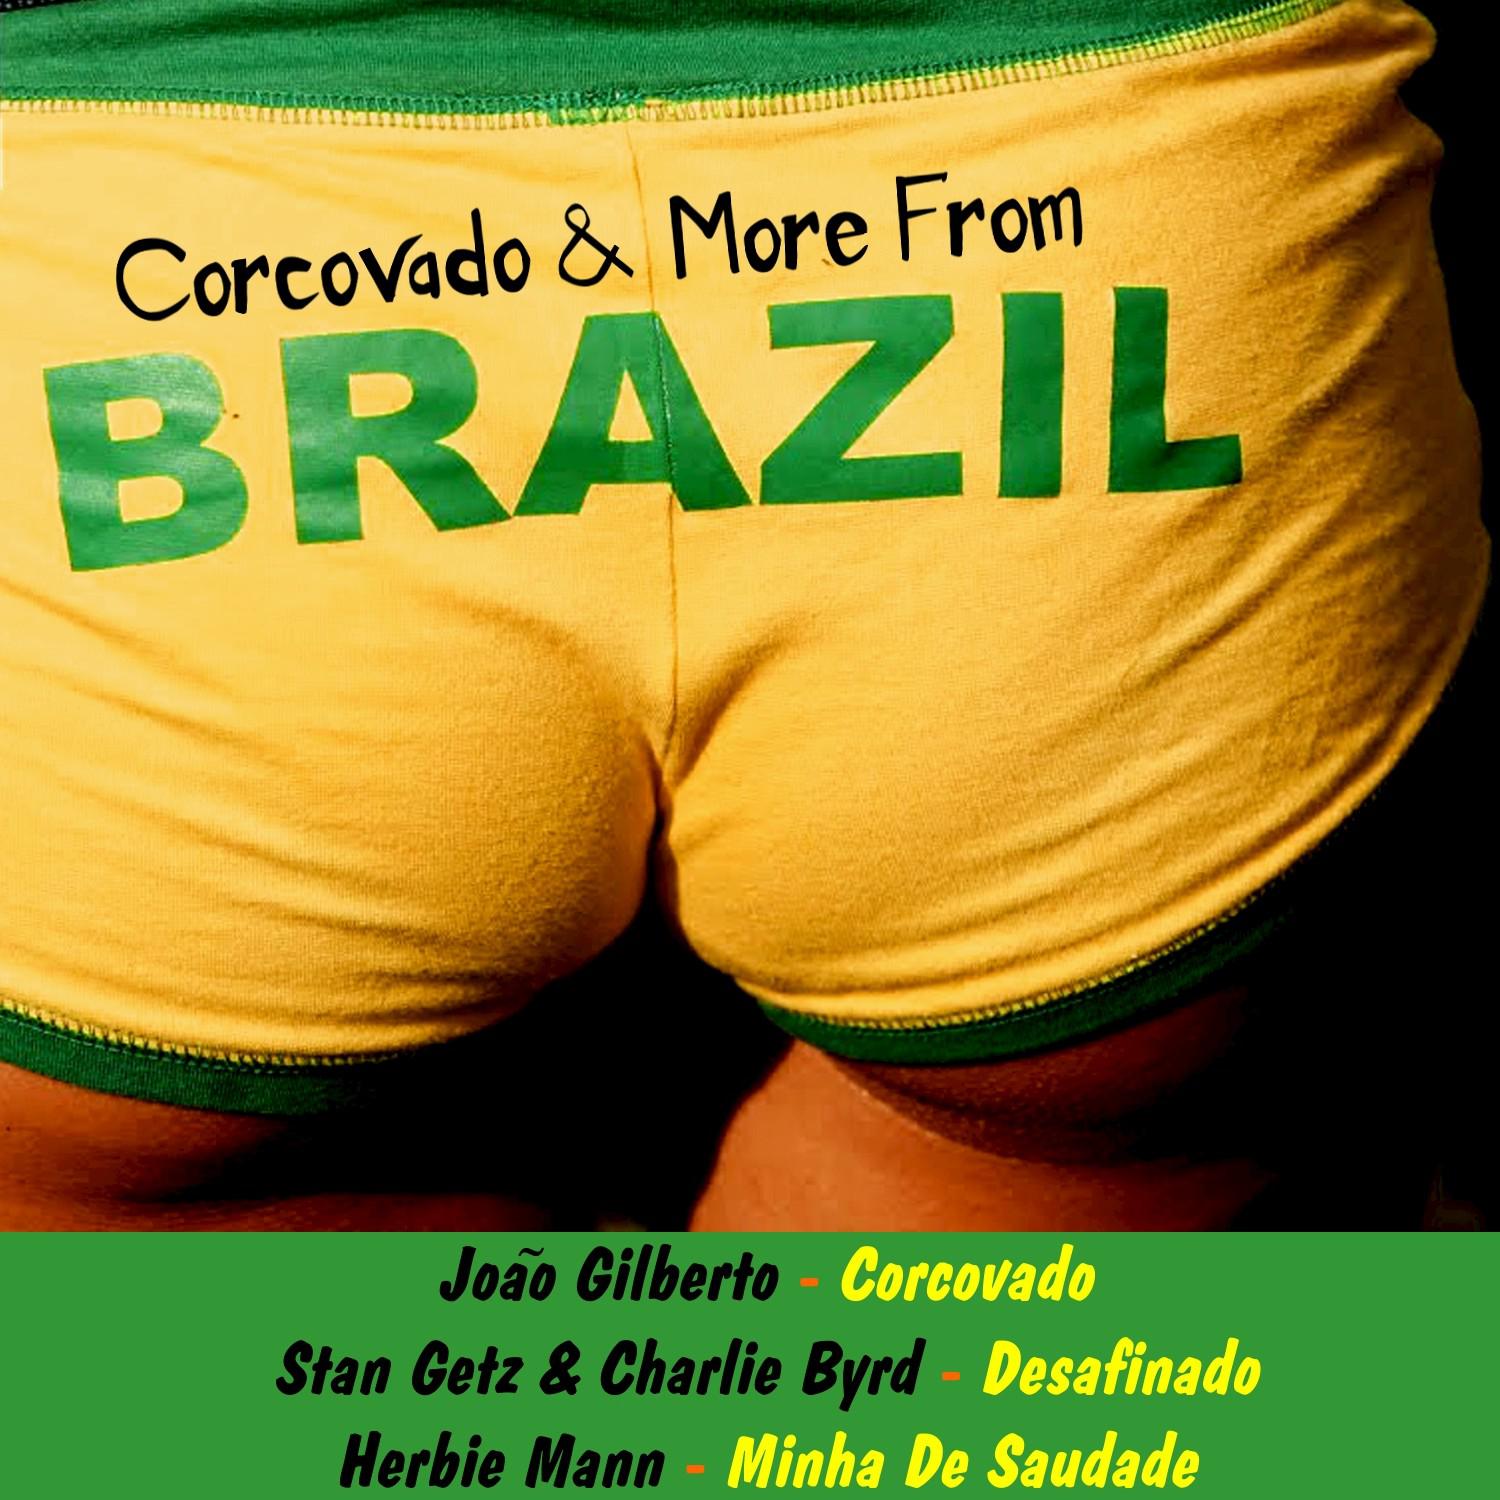 Corcovado & More from Brasil